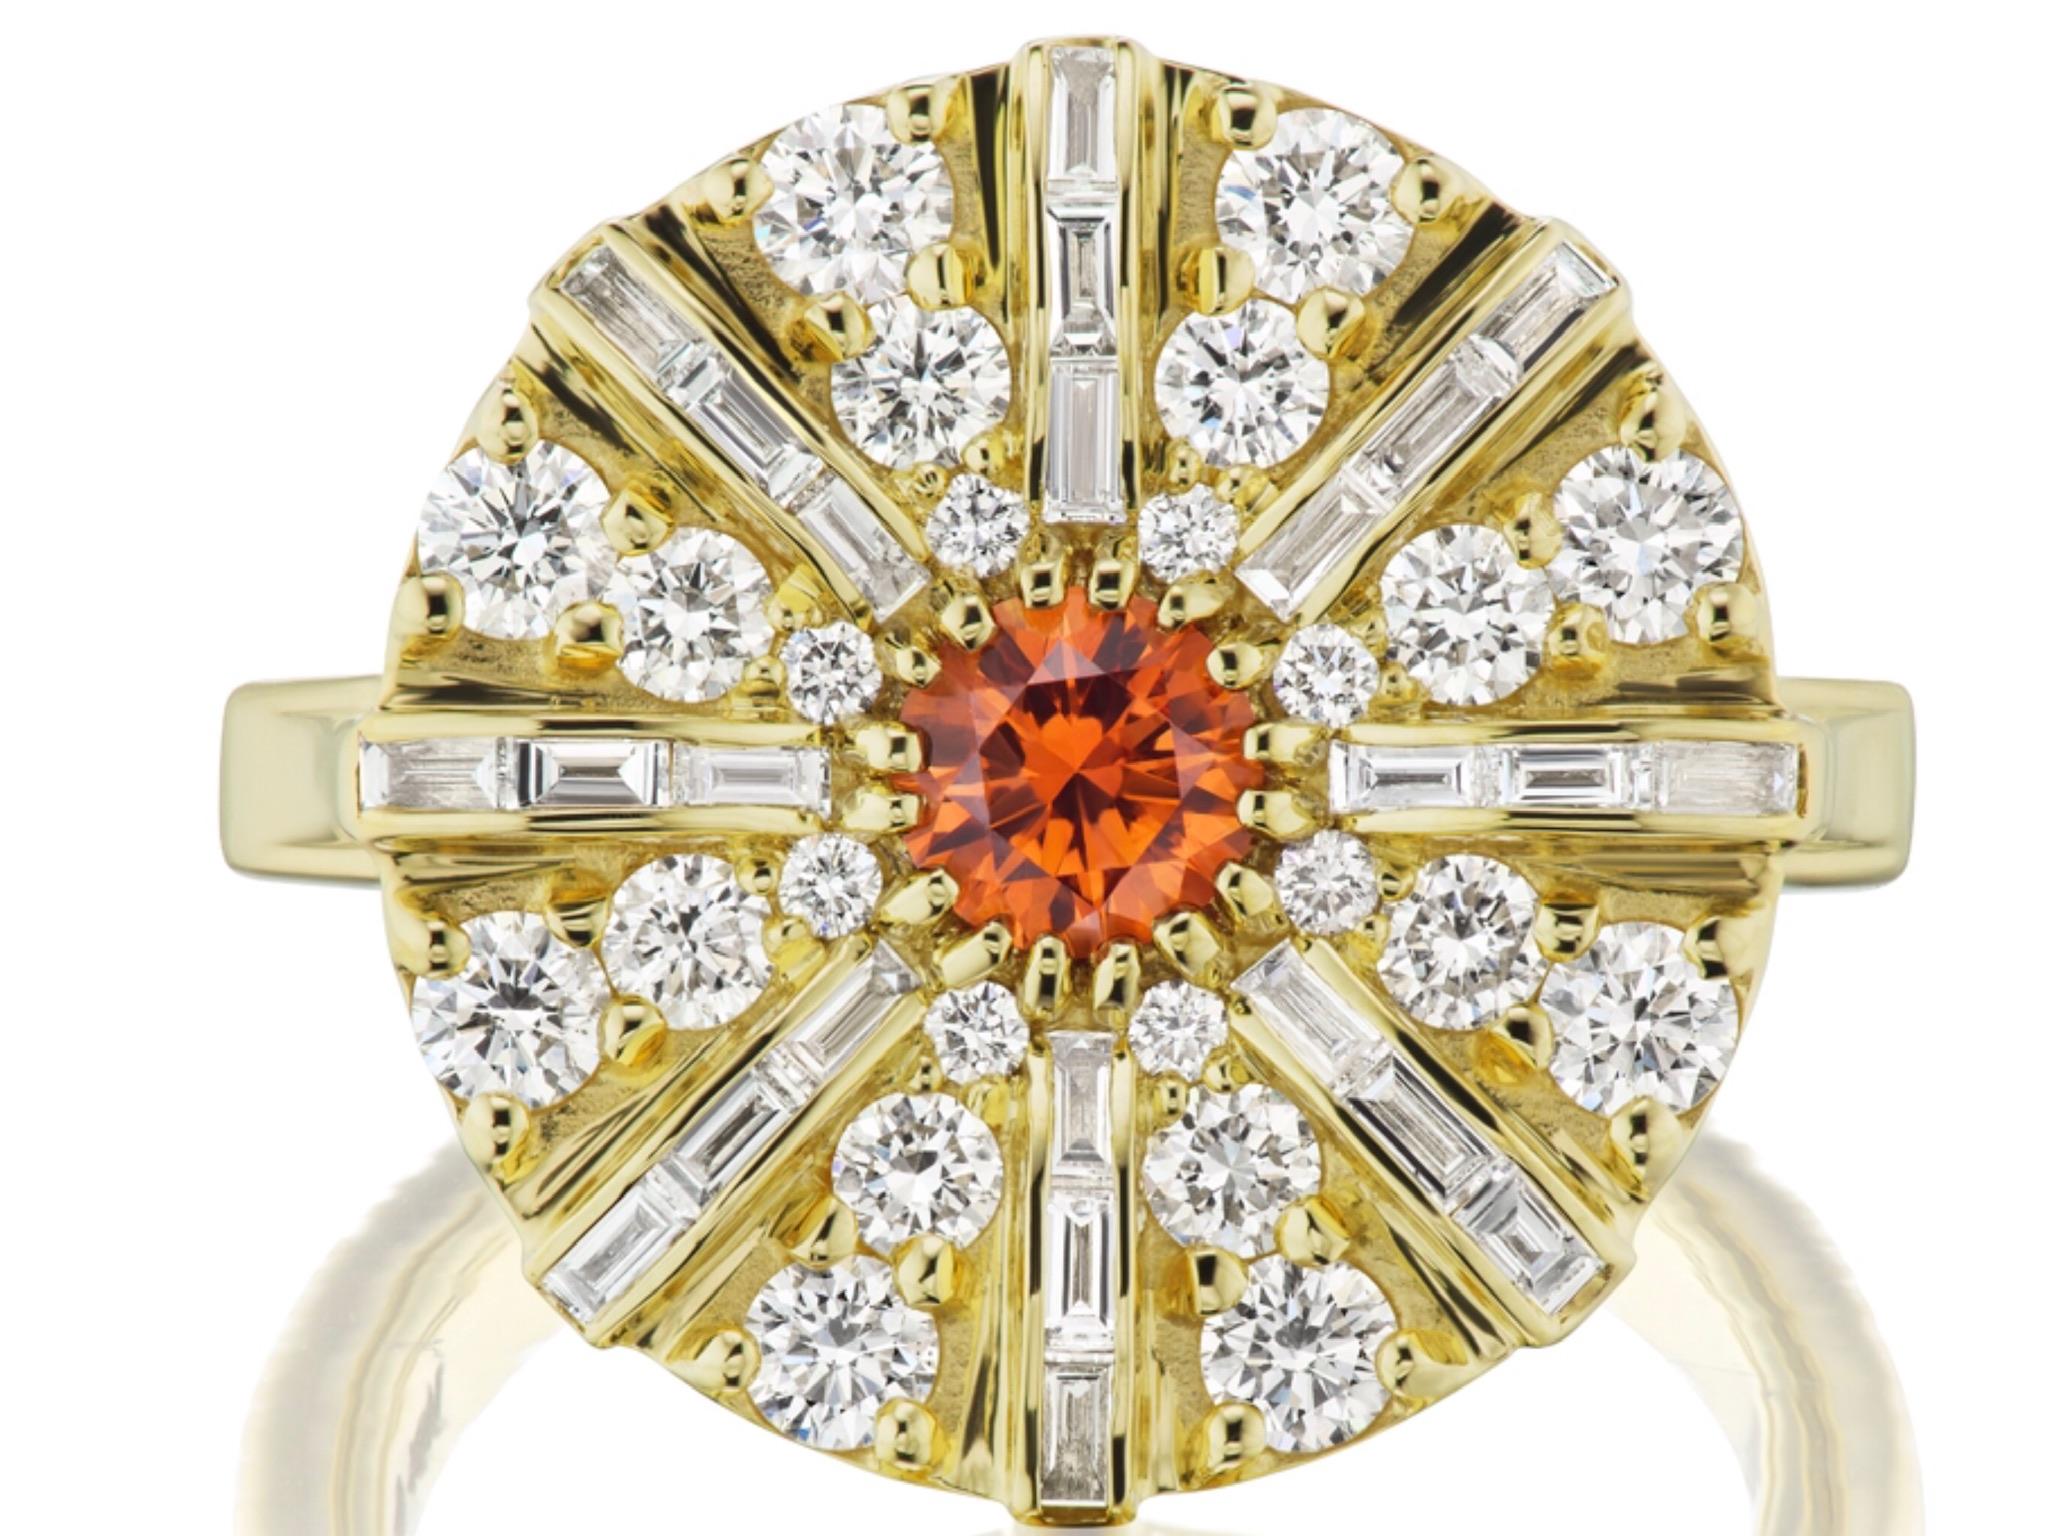 Fancy .49 carat Tangerine Sapphire in a beautiful pinky orange shade. Montana mined sapphires are known for the clarity and vivid colors, especially in the fancy color variety (lavender, orange, green, pink). This is no exception. It is mounted in